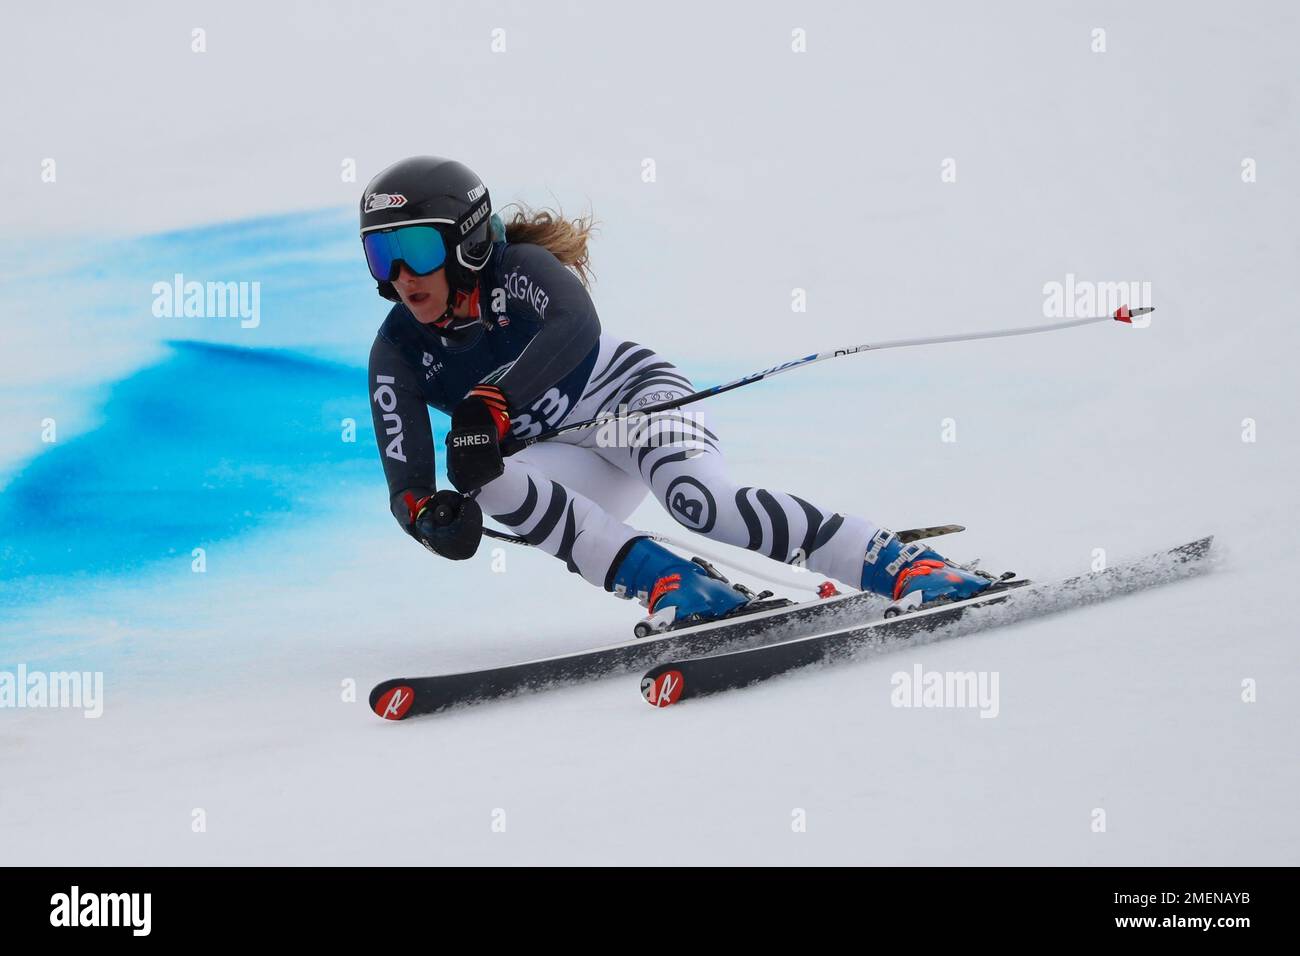 Resi Stiegler competes in the women's Super-G at the U.S. Alpine Championship skiing race, Tuesday, April 13, 2021, in Aspen, Colo. (AP Photo/Hugh Carey) Stock Photo